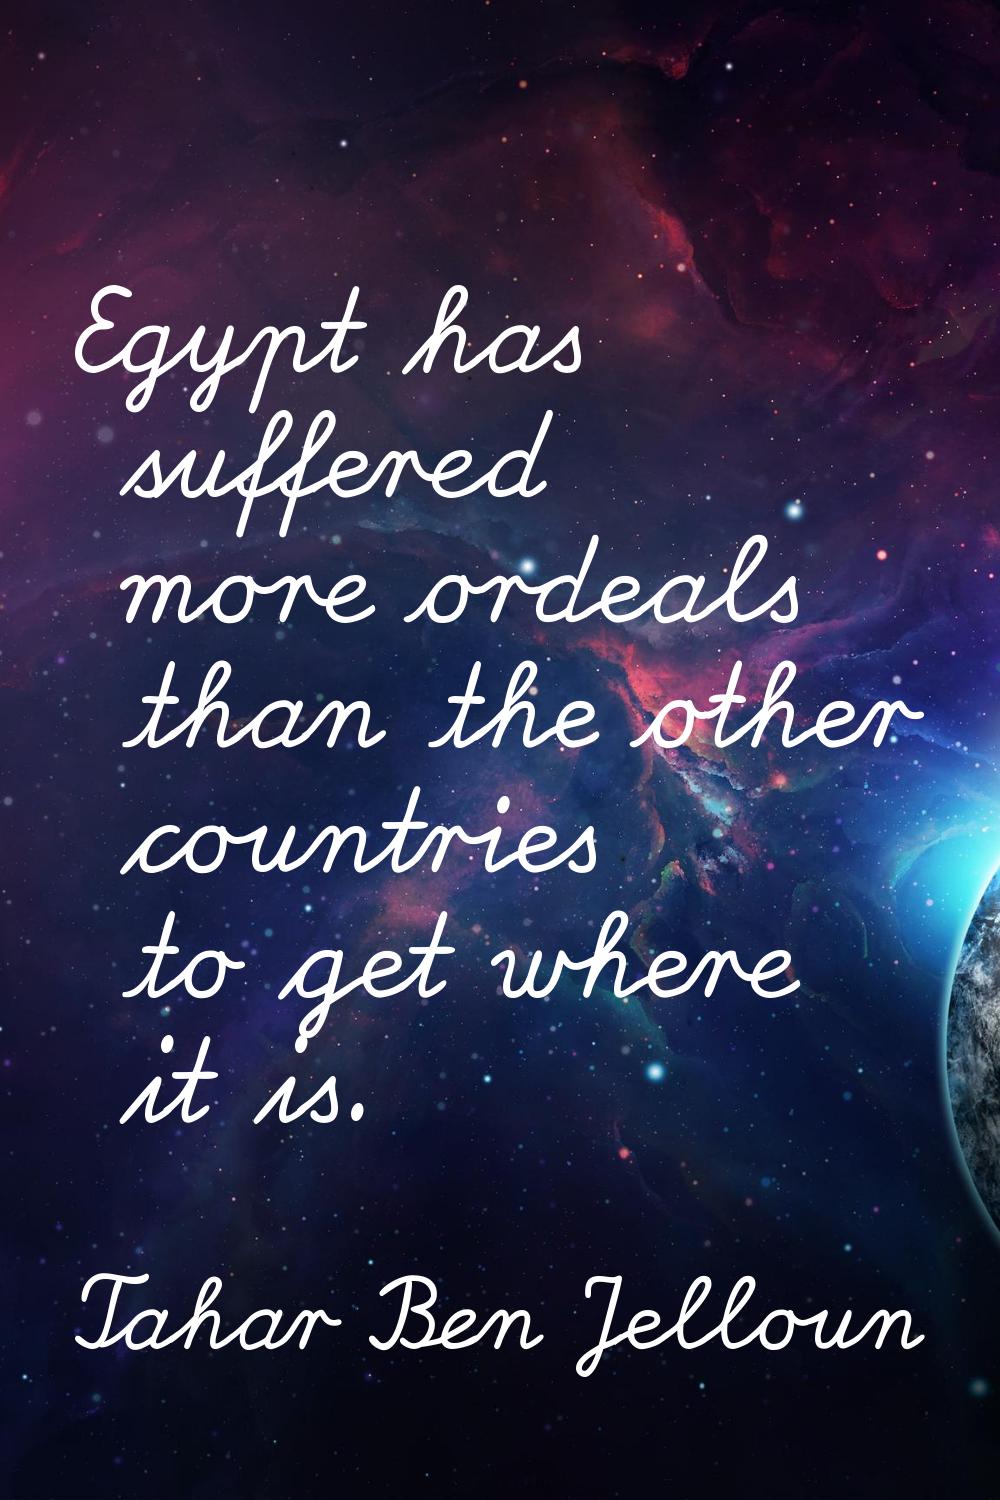 Egypt has suffered more ordeals than the other countries to get where it is.